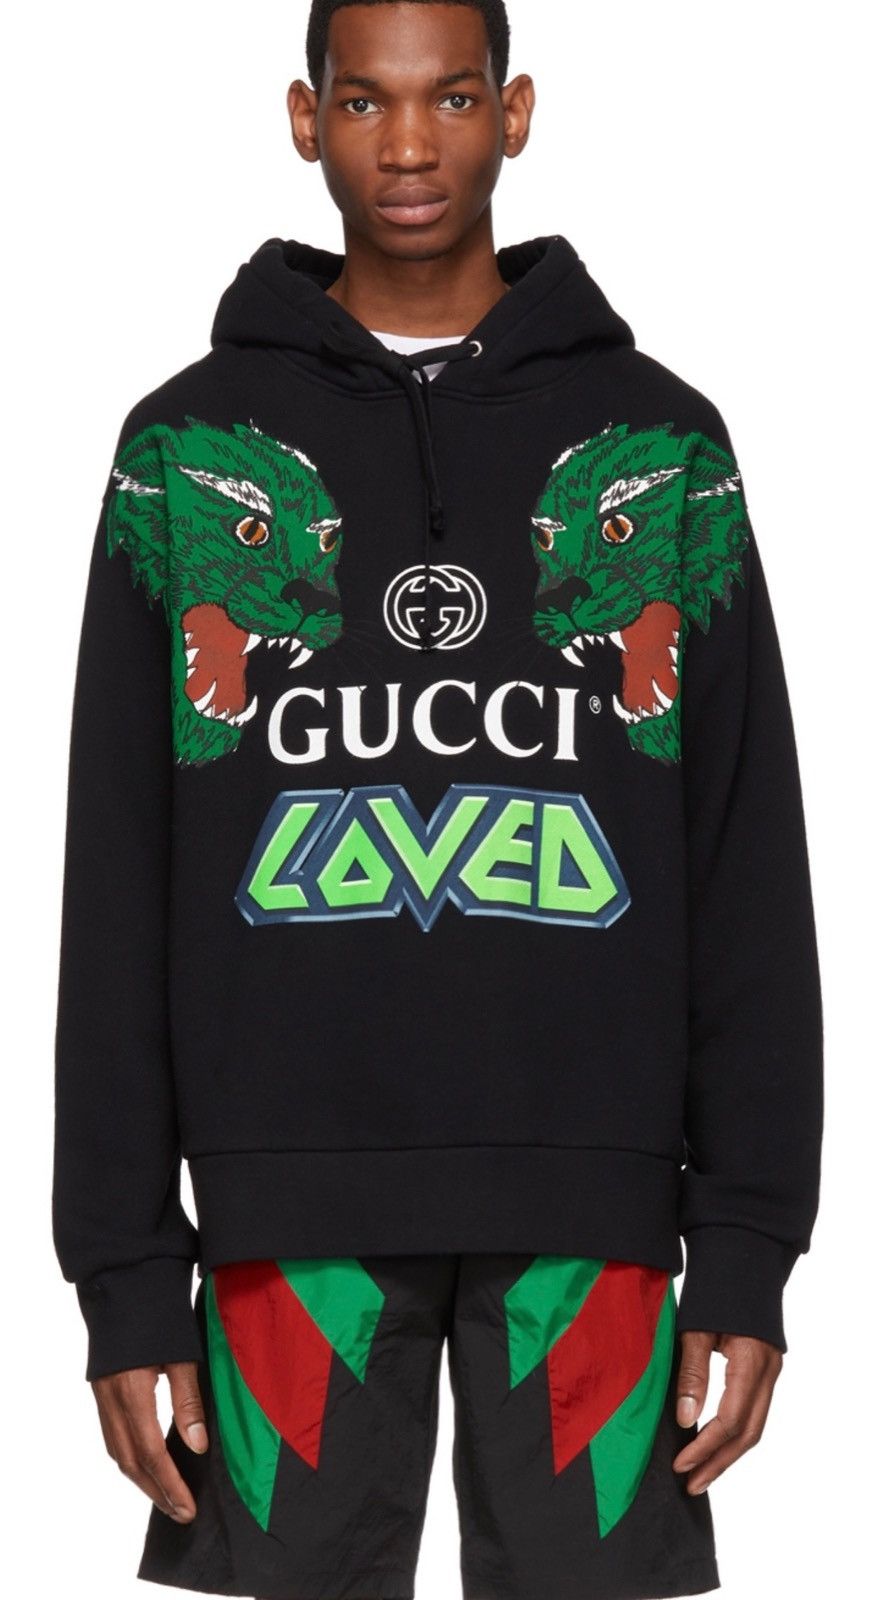 Gucci Gucci LOVED Hoodie Size US S / EU 44-46 / 1 - 7 Thumbnail